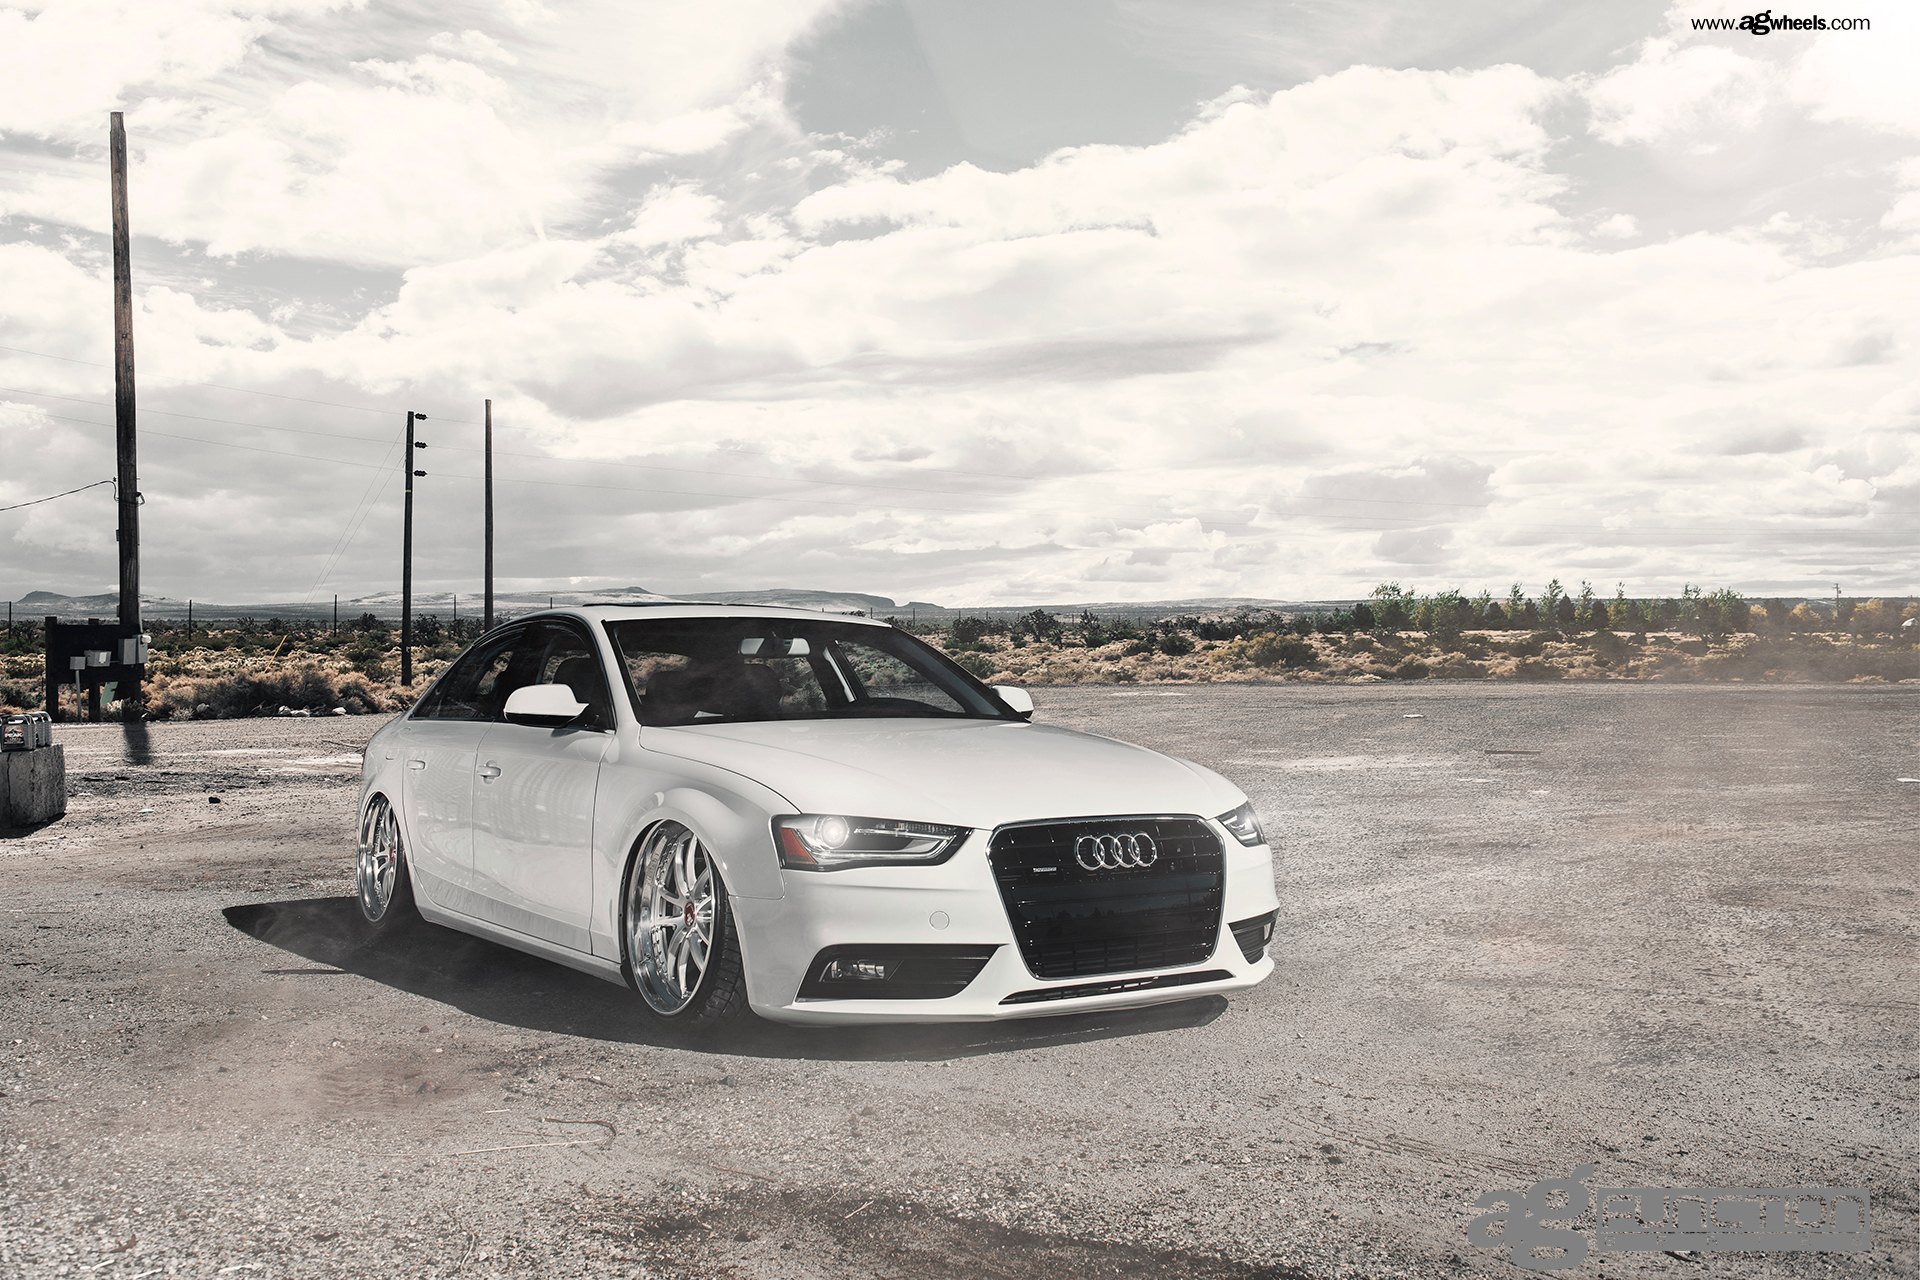 White Audi A4 with Aftermarket Front Bumper - Photo by Avant Garde Wheels